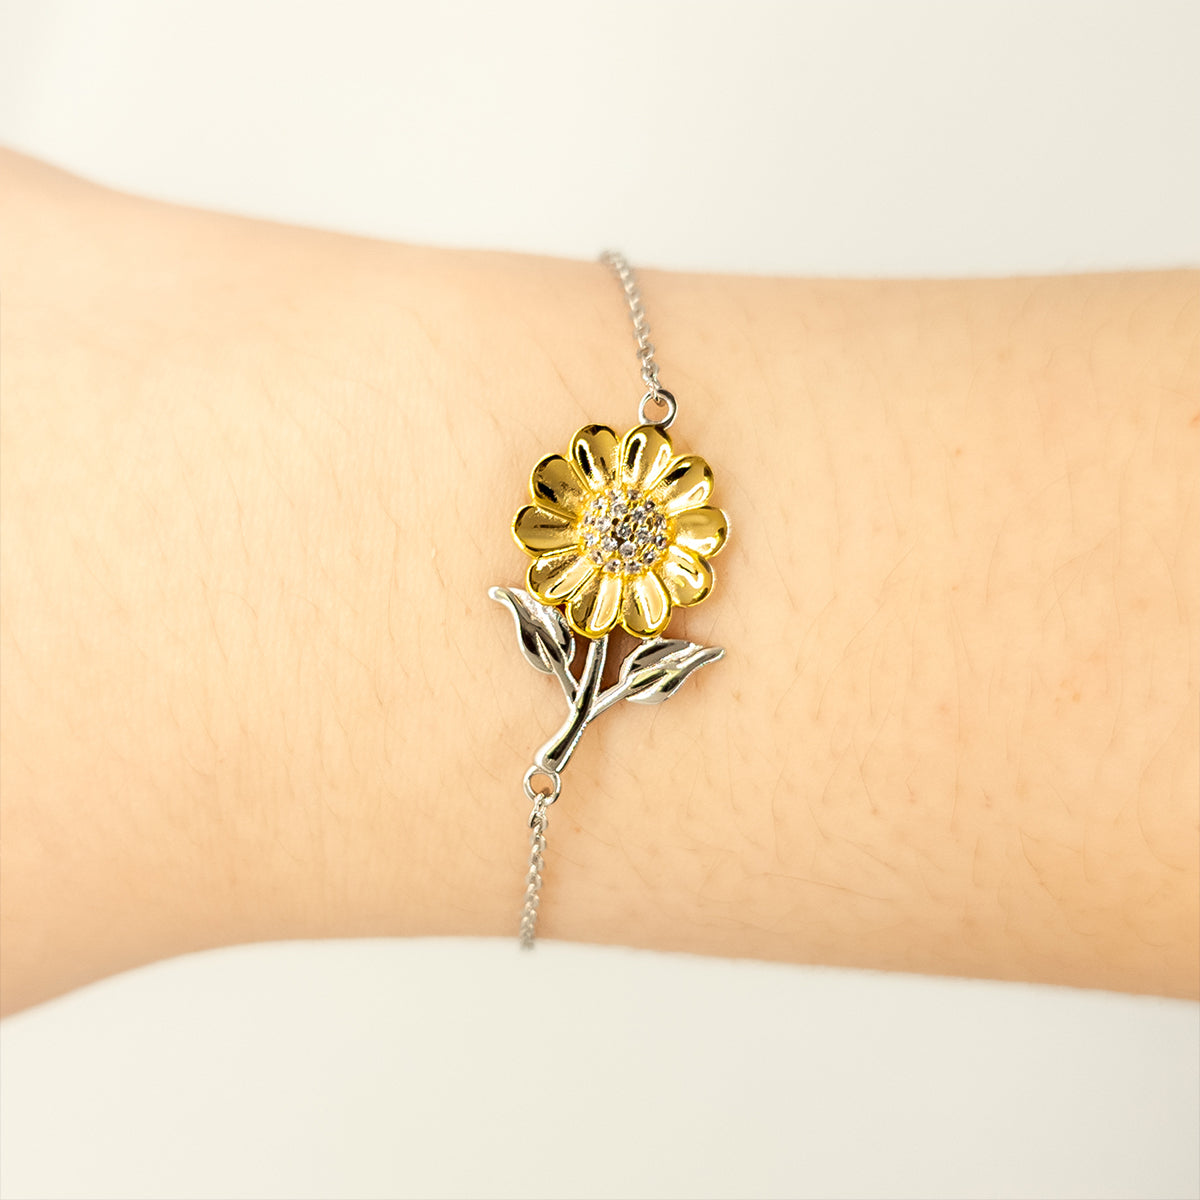 Abuelo Sunflower Bracelet - Always in My Heart - Unique Gift for Grandfather on Birthday, Christmas, or Graduation - Engraved Confidence and Hope